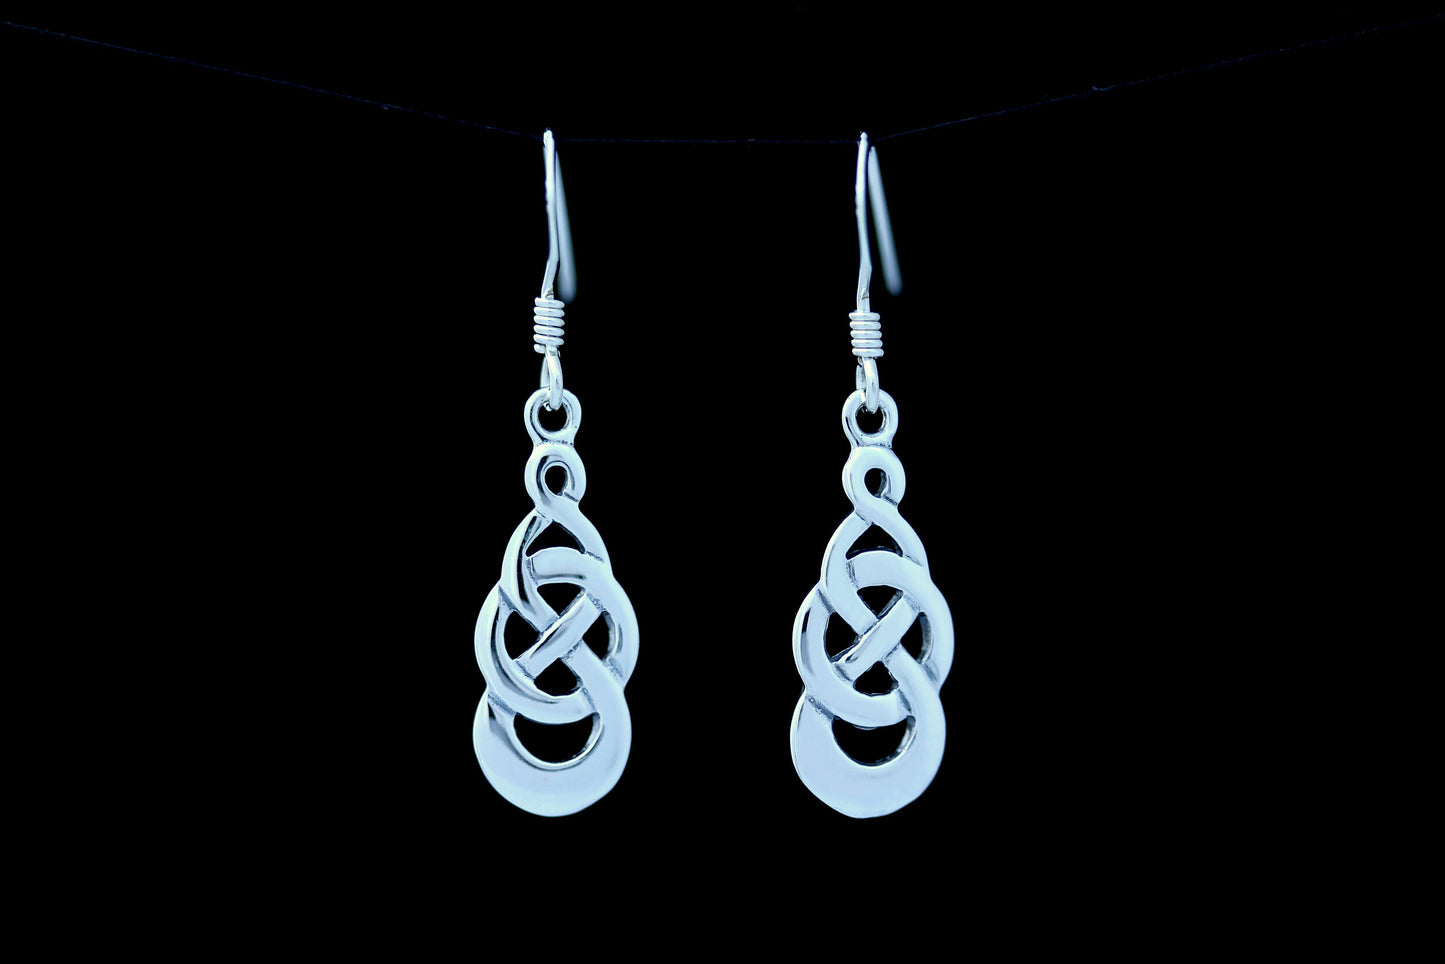 Celtic Knot Earrings - Large Looped Knot